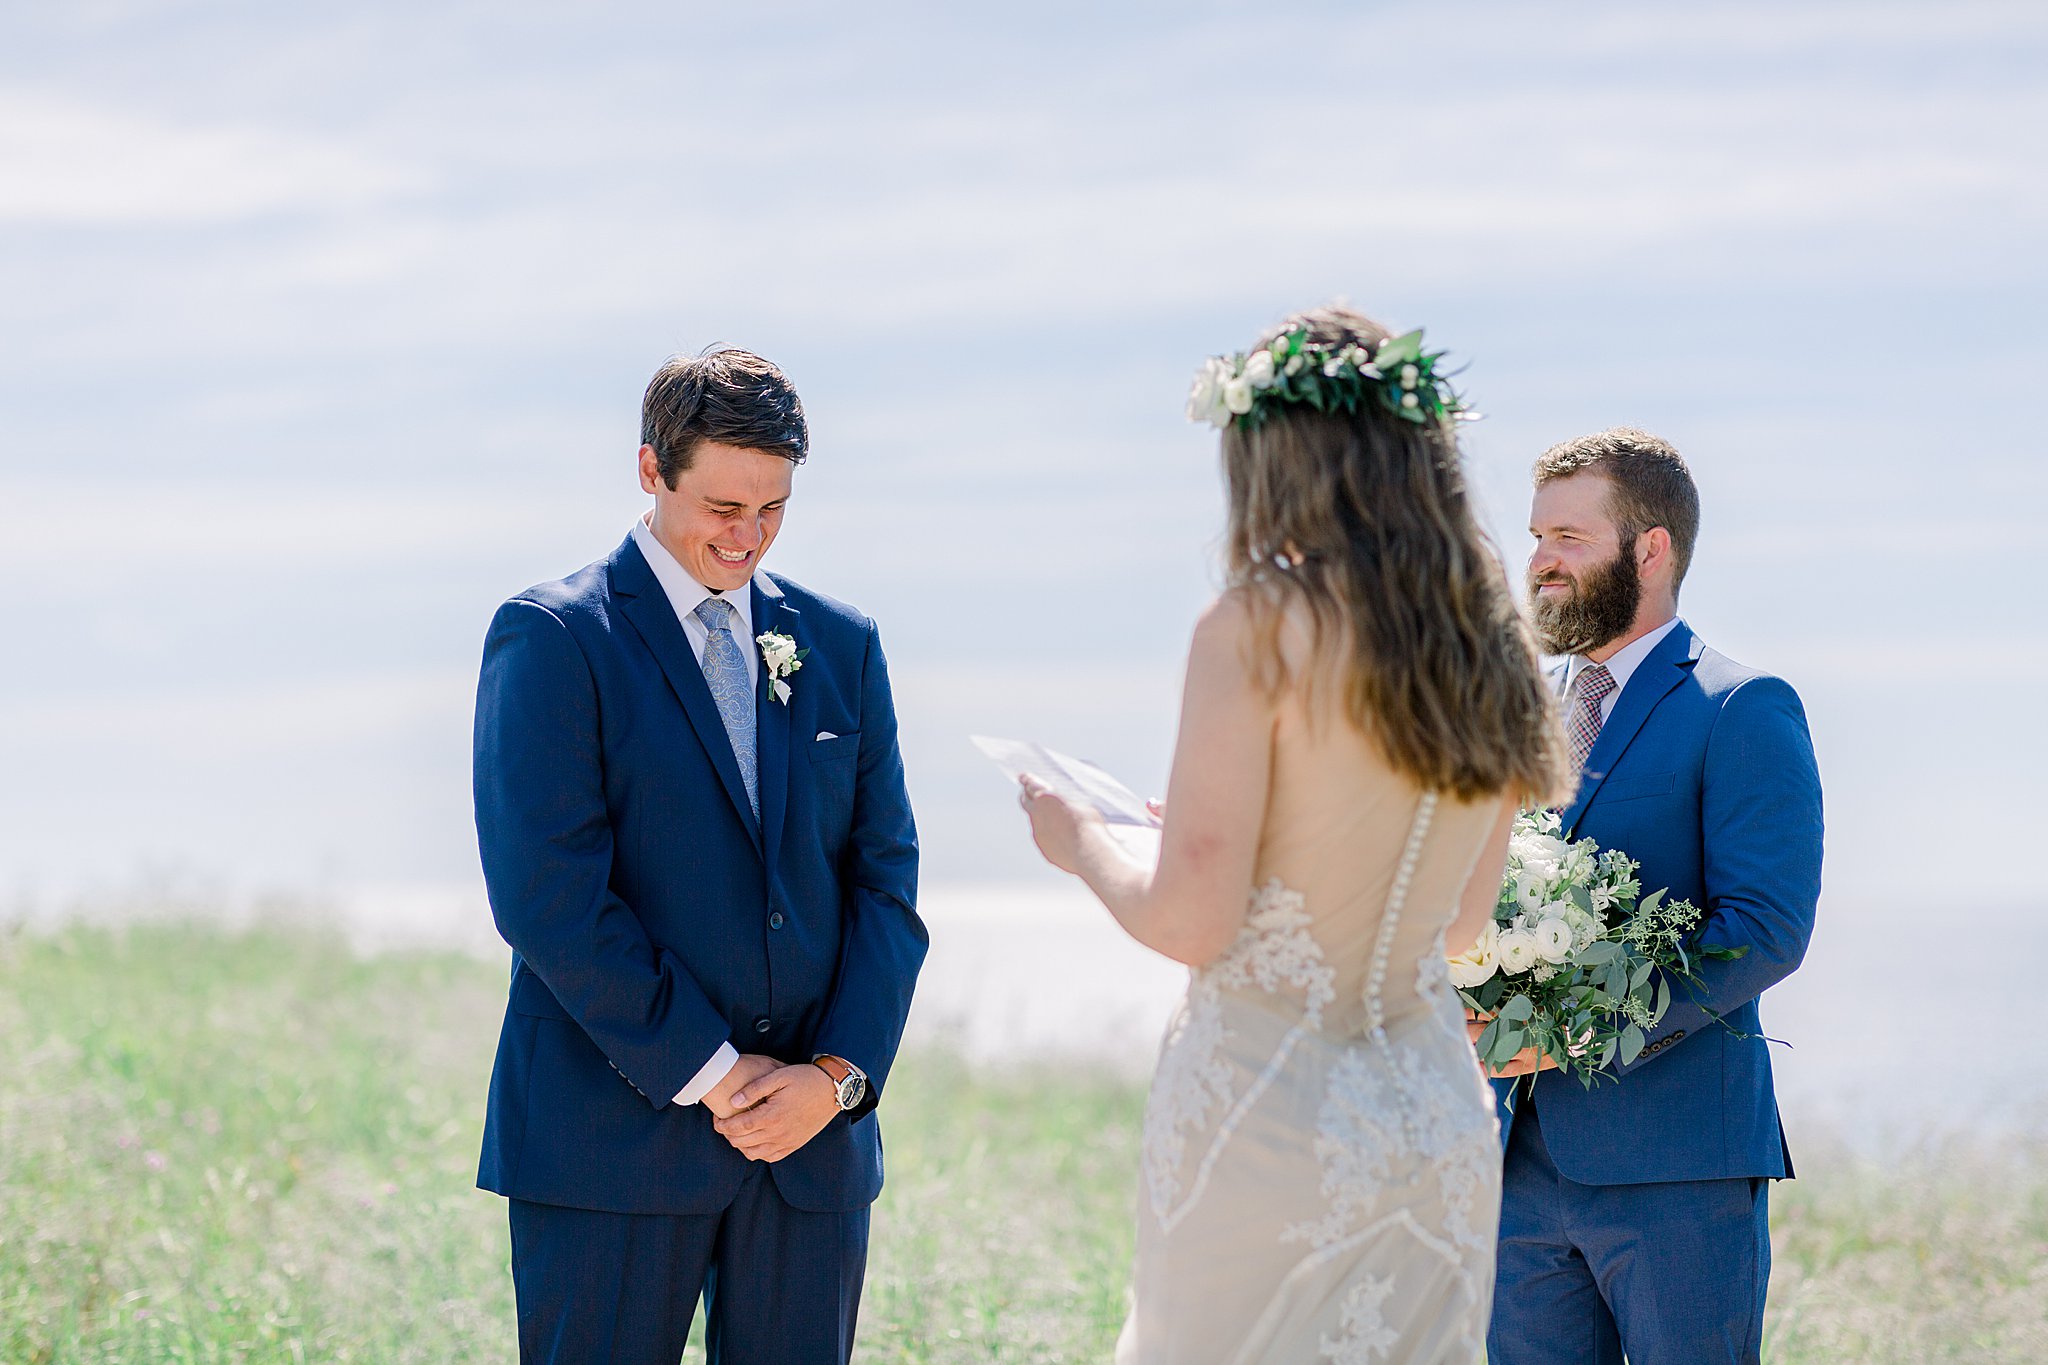 Groom gets emotional during bride's wedding vows at their Northern Michigan elopement.